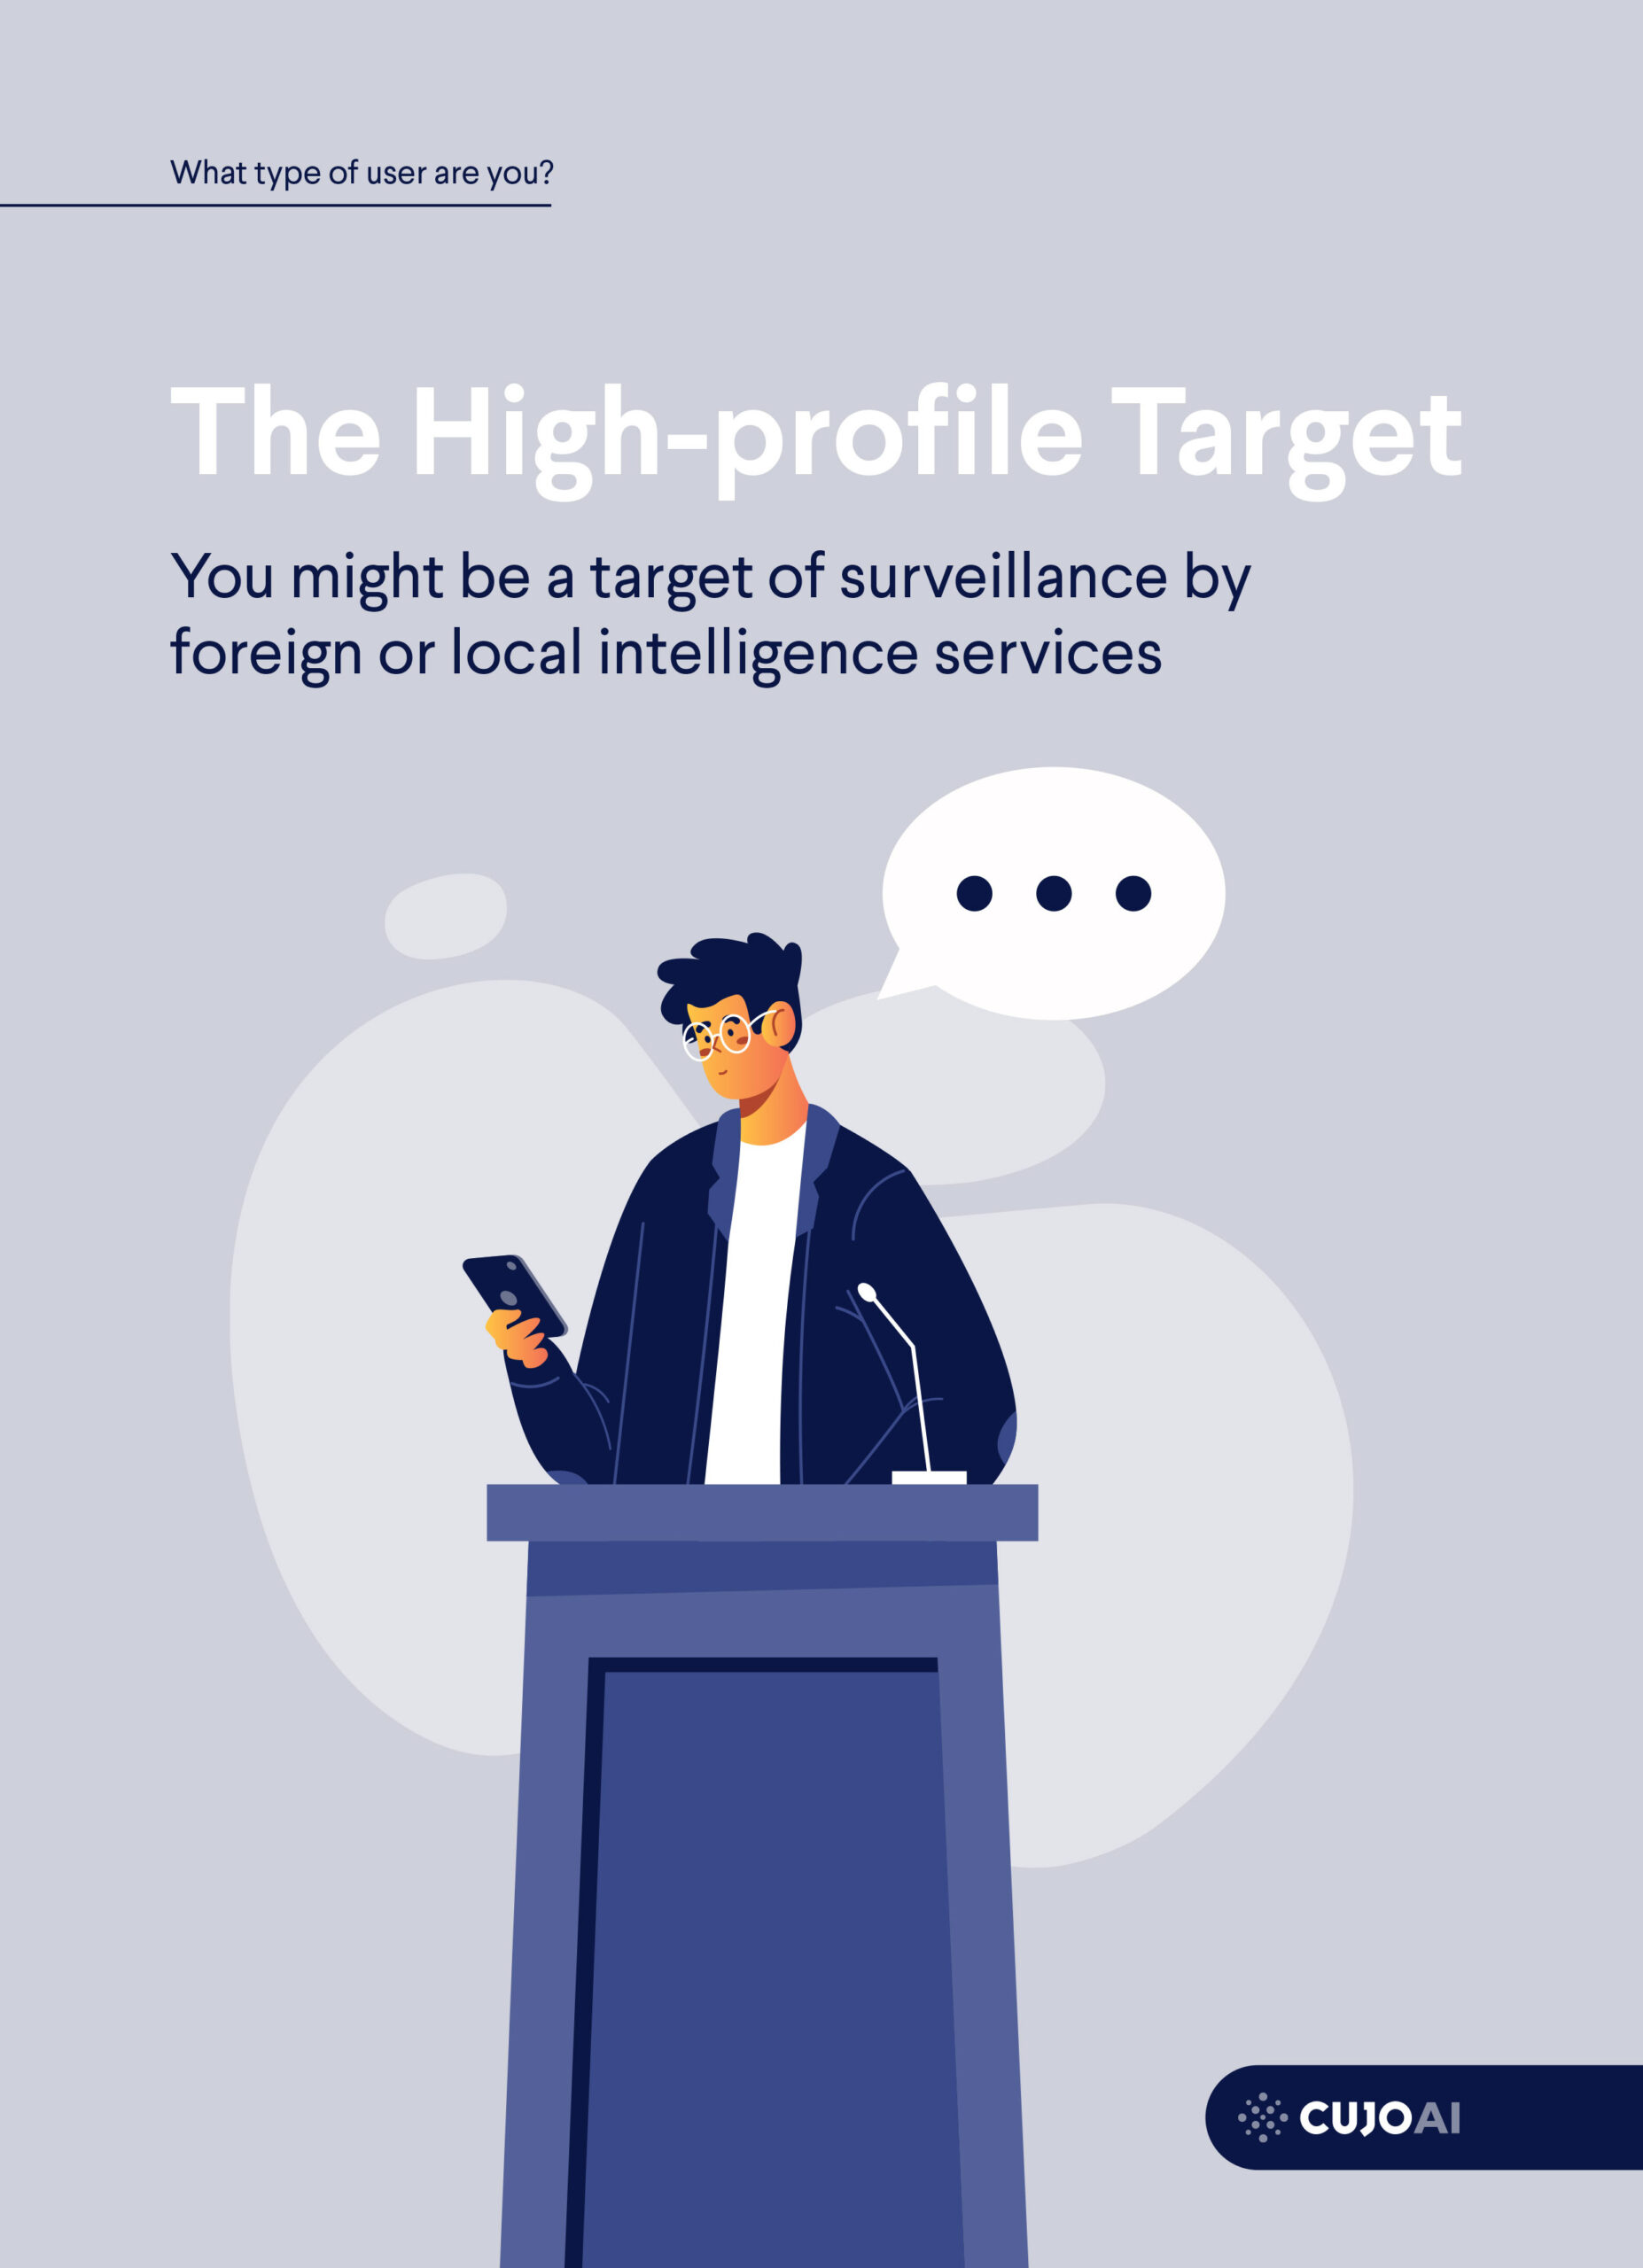 The high-profile target